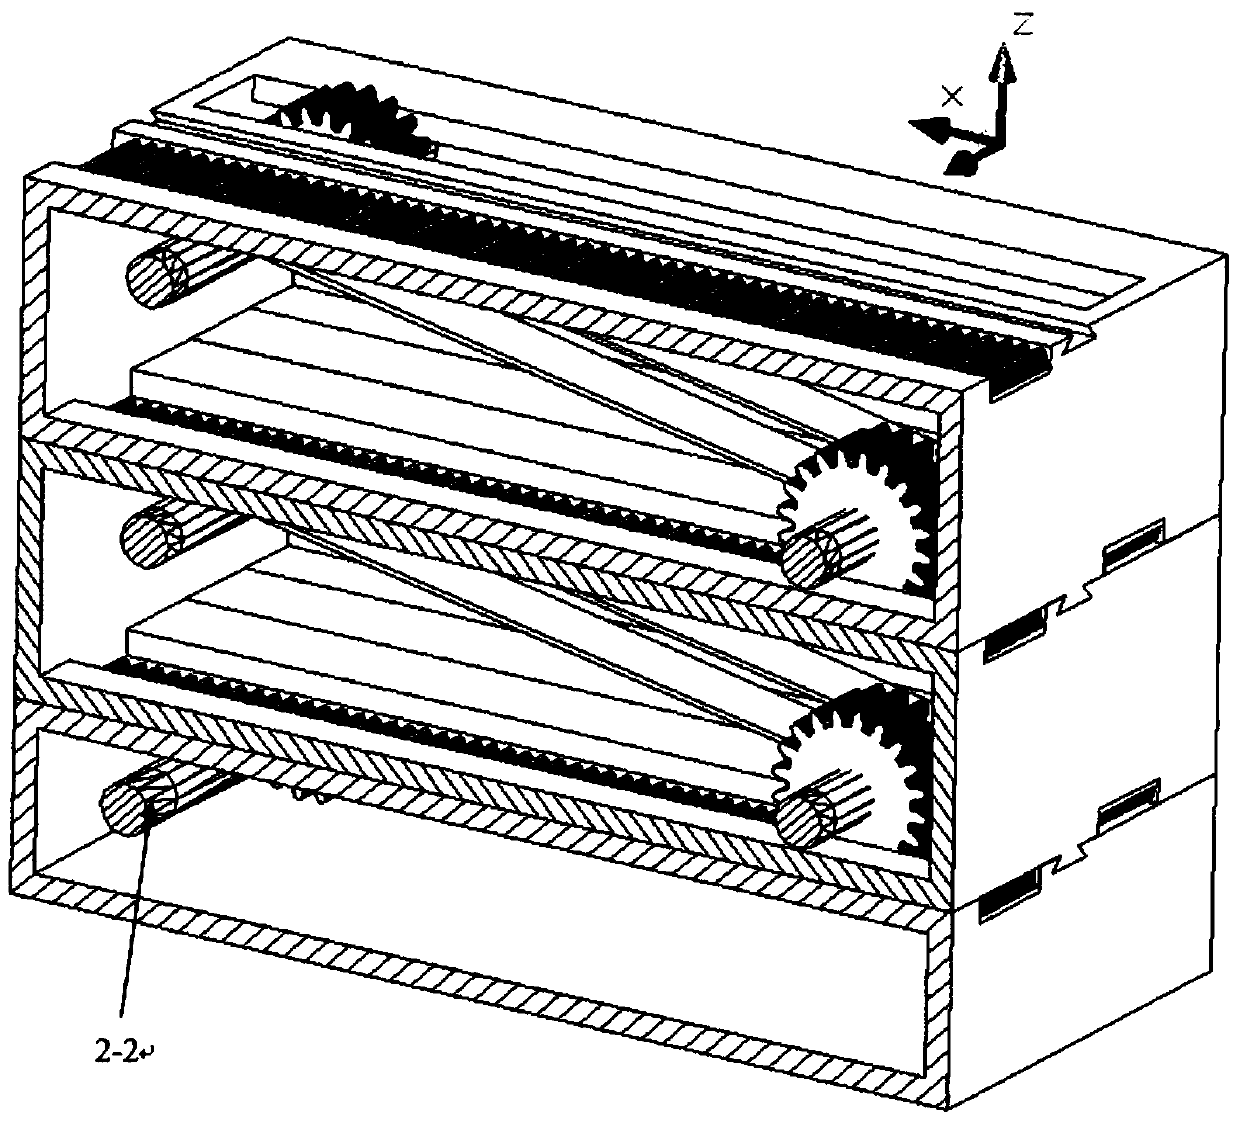 A linear linkage expansion device